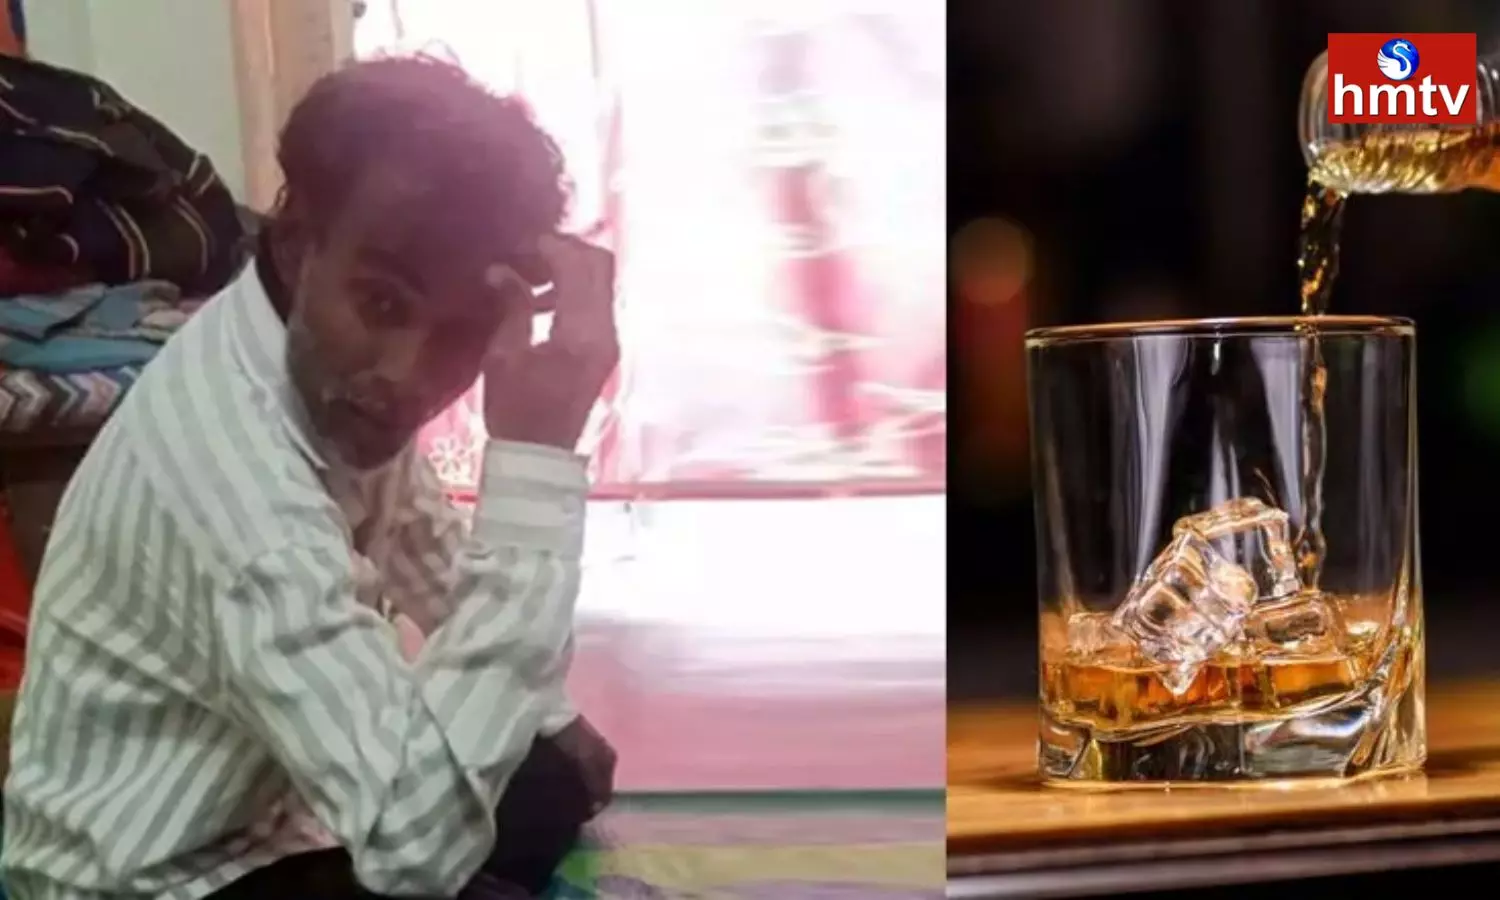 Grandfather Sold His Grandson For Alcohol In Hyderabad